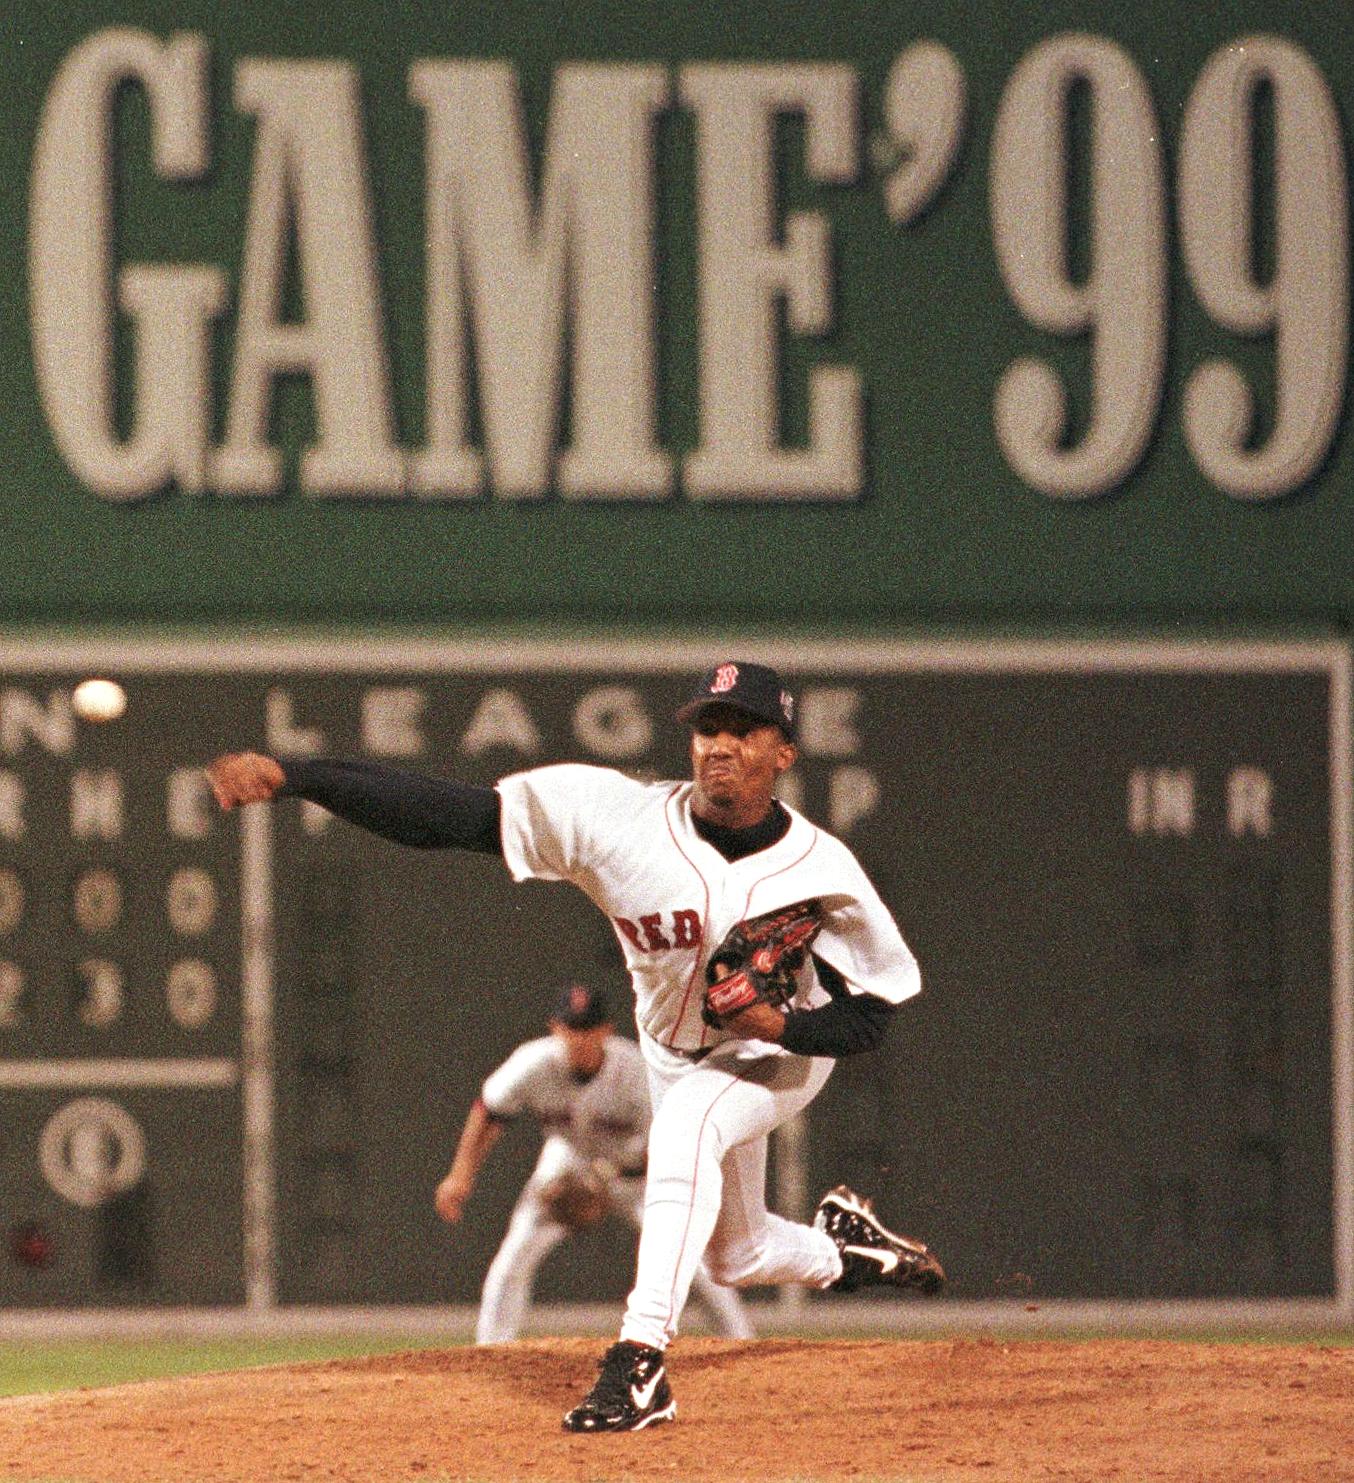 Pedro Martinez fires a pitch during the 1999 MLB All-Star Game at Fenway Park. (Credit: Bill Polo/AFP/Getty Images)